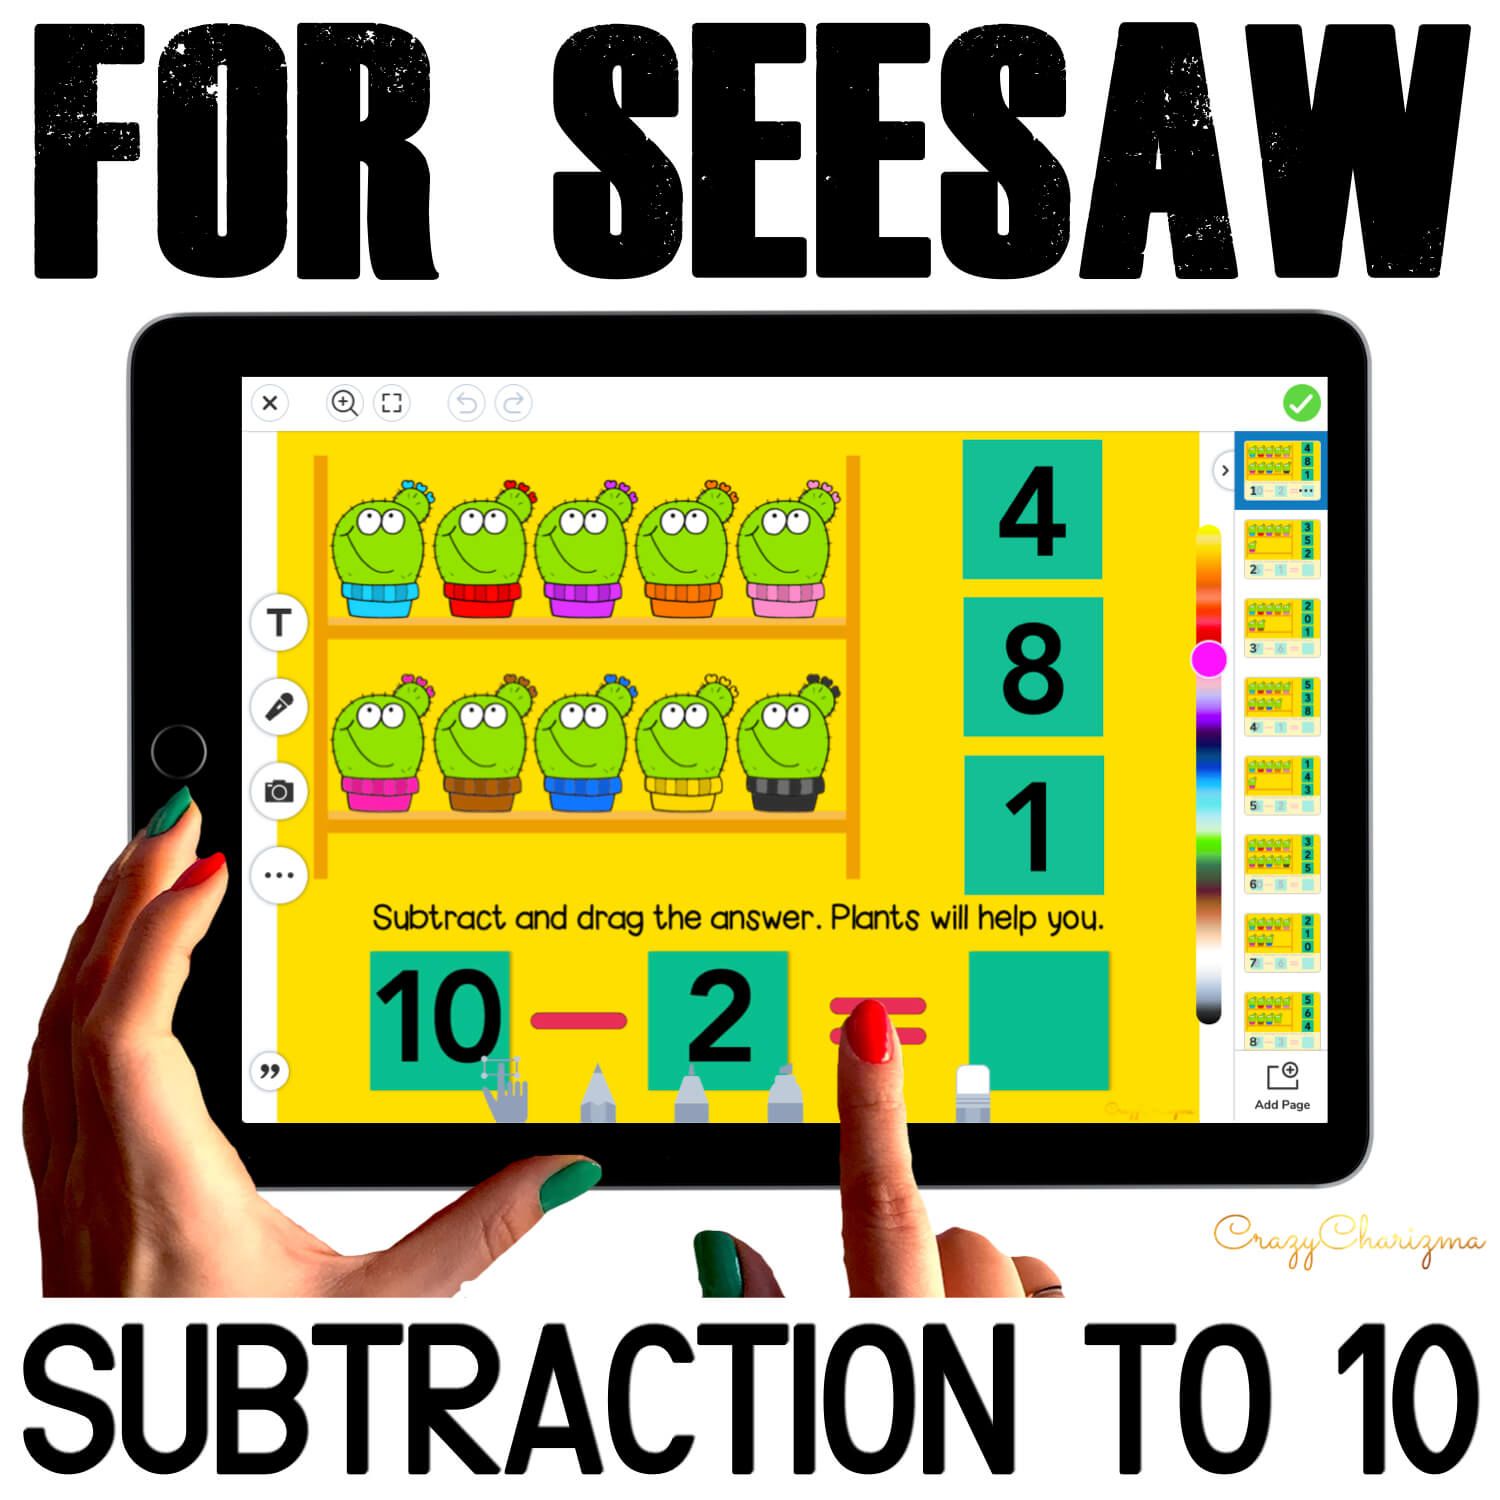 Need fun activities to use in Seesaw? Looking for an engaging Subtraction to 10 practice for distance learning? Have fun with this math center. Kids will subtract numbers and drag moveable pieces with the correct answer. Pictures of plants will help!